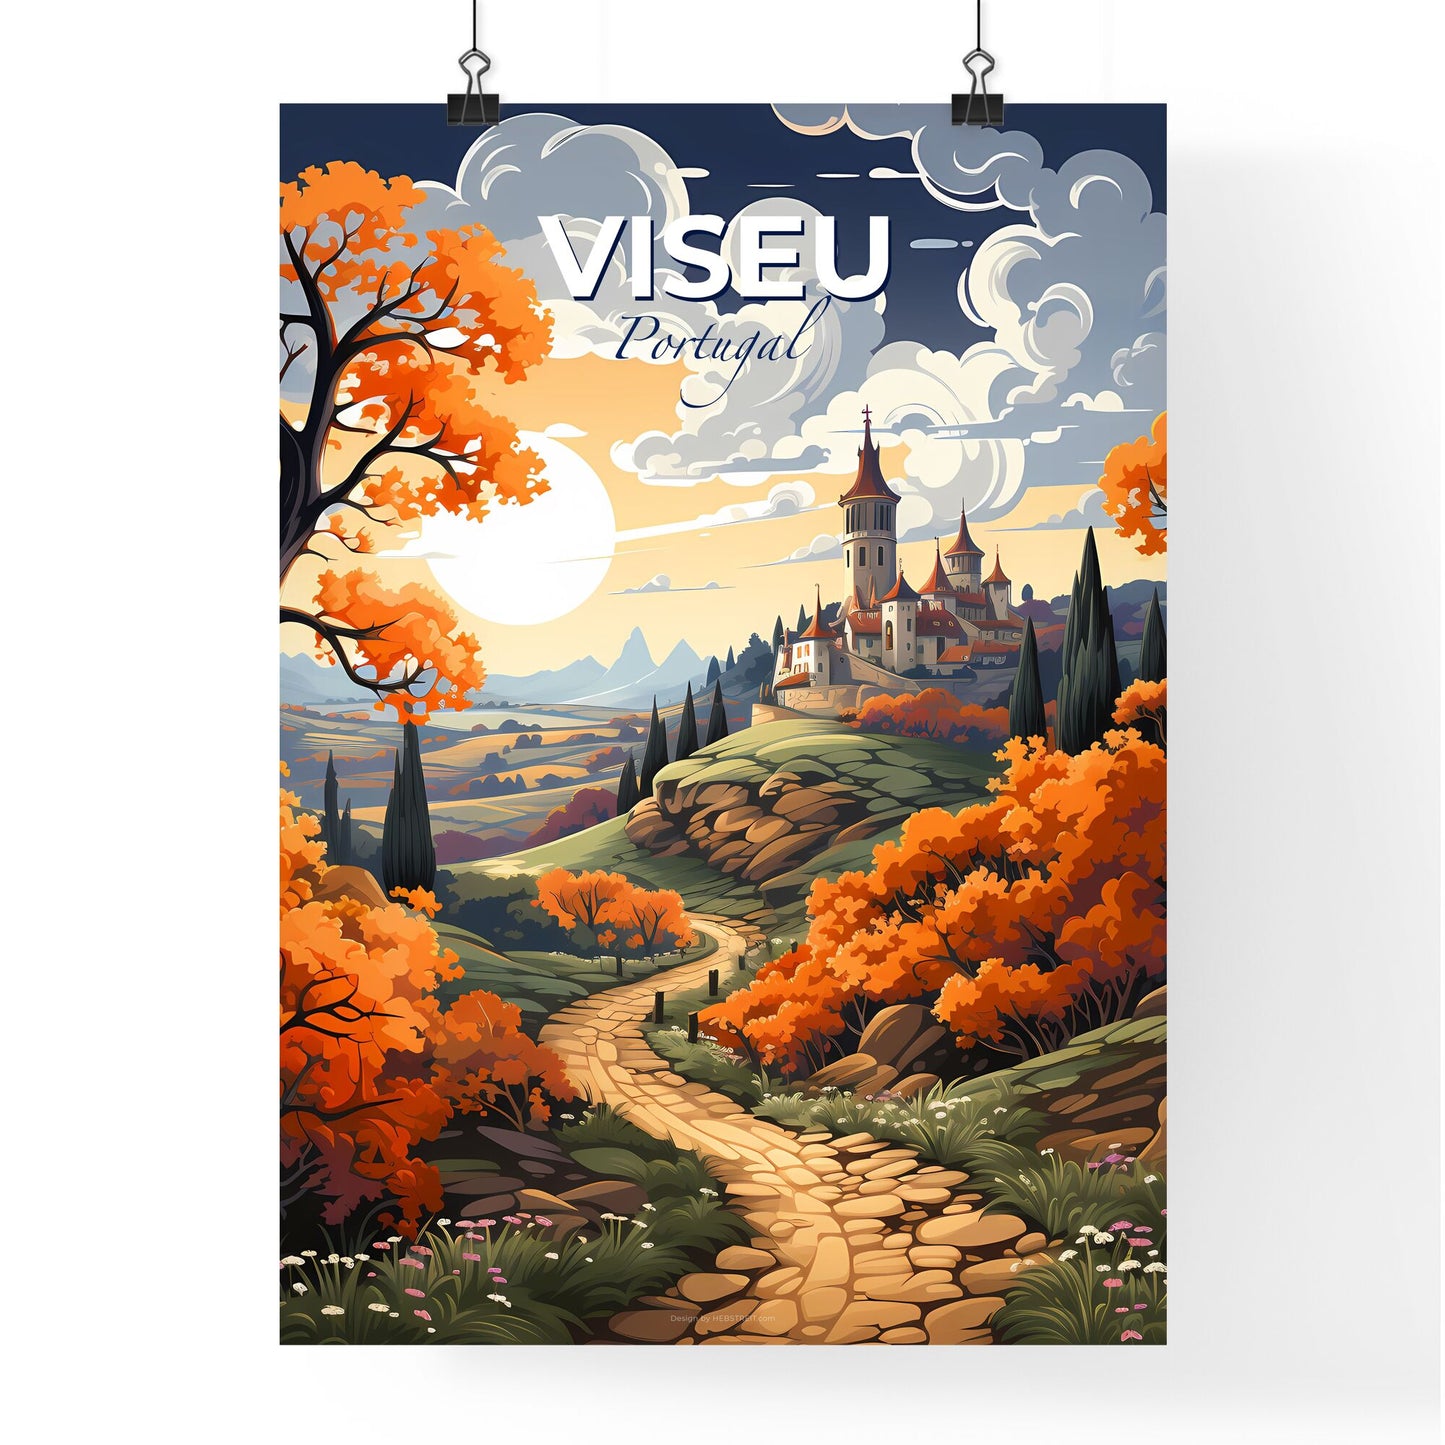 Viseu, Portugal, A Poster of a painting of a castle on a hill with trees and a road Default Title